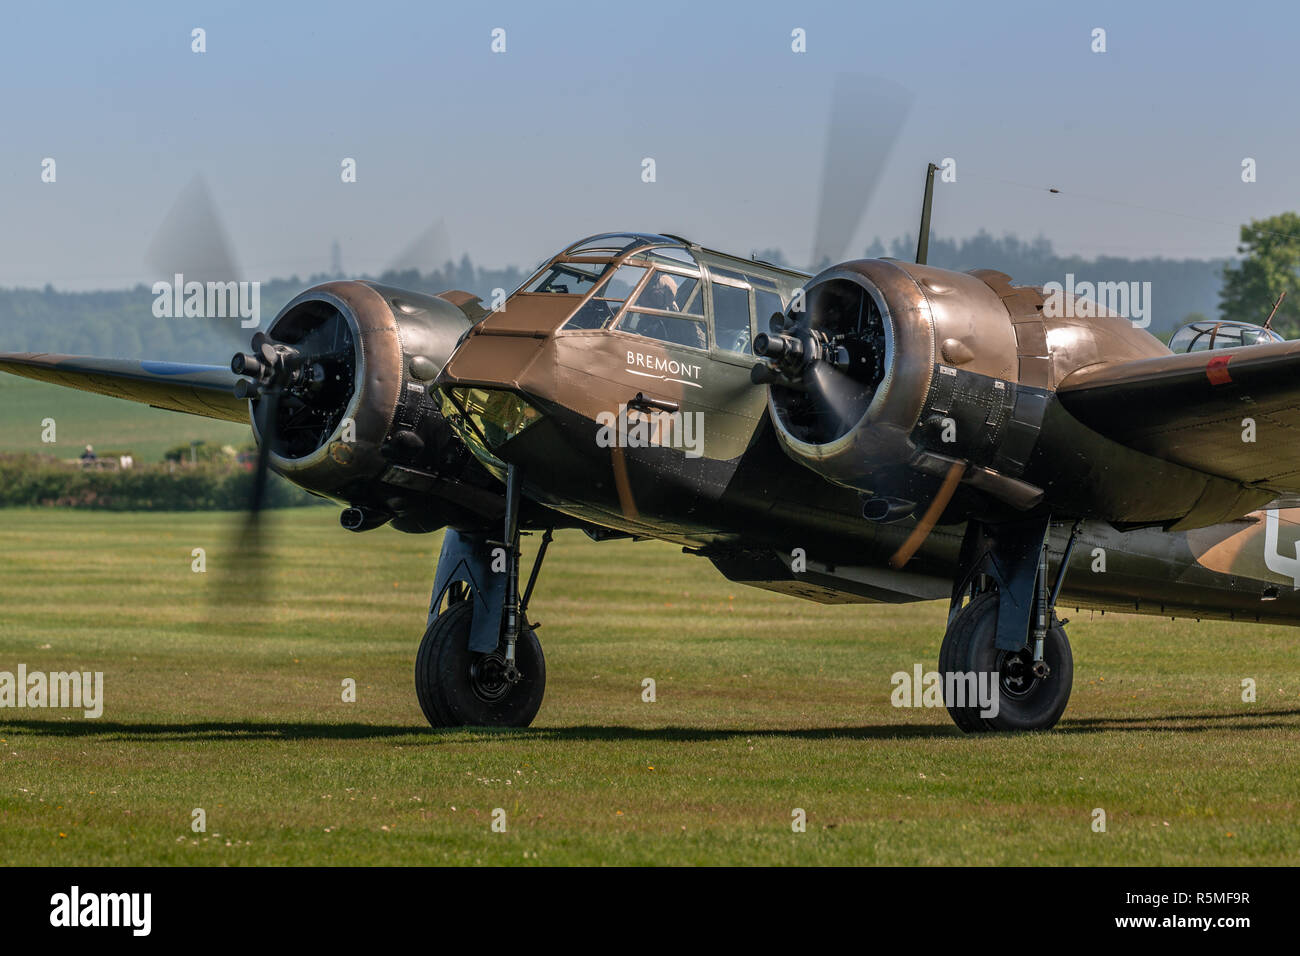 Biggleswade, UK - 6th May 2018: A Bristol Blenheim Mk1 belonging to the Aircraft Restoration Company, Duxford, UK. taxiing on airfield Stock Photo